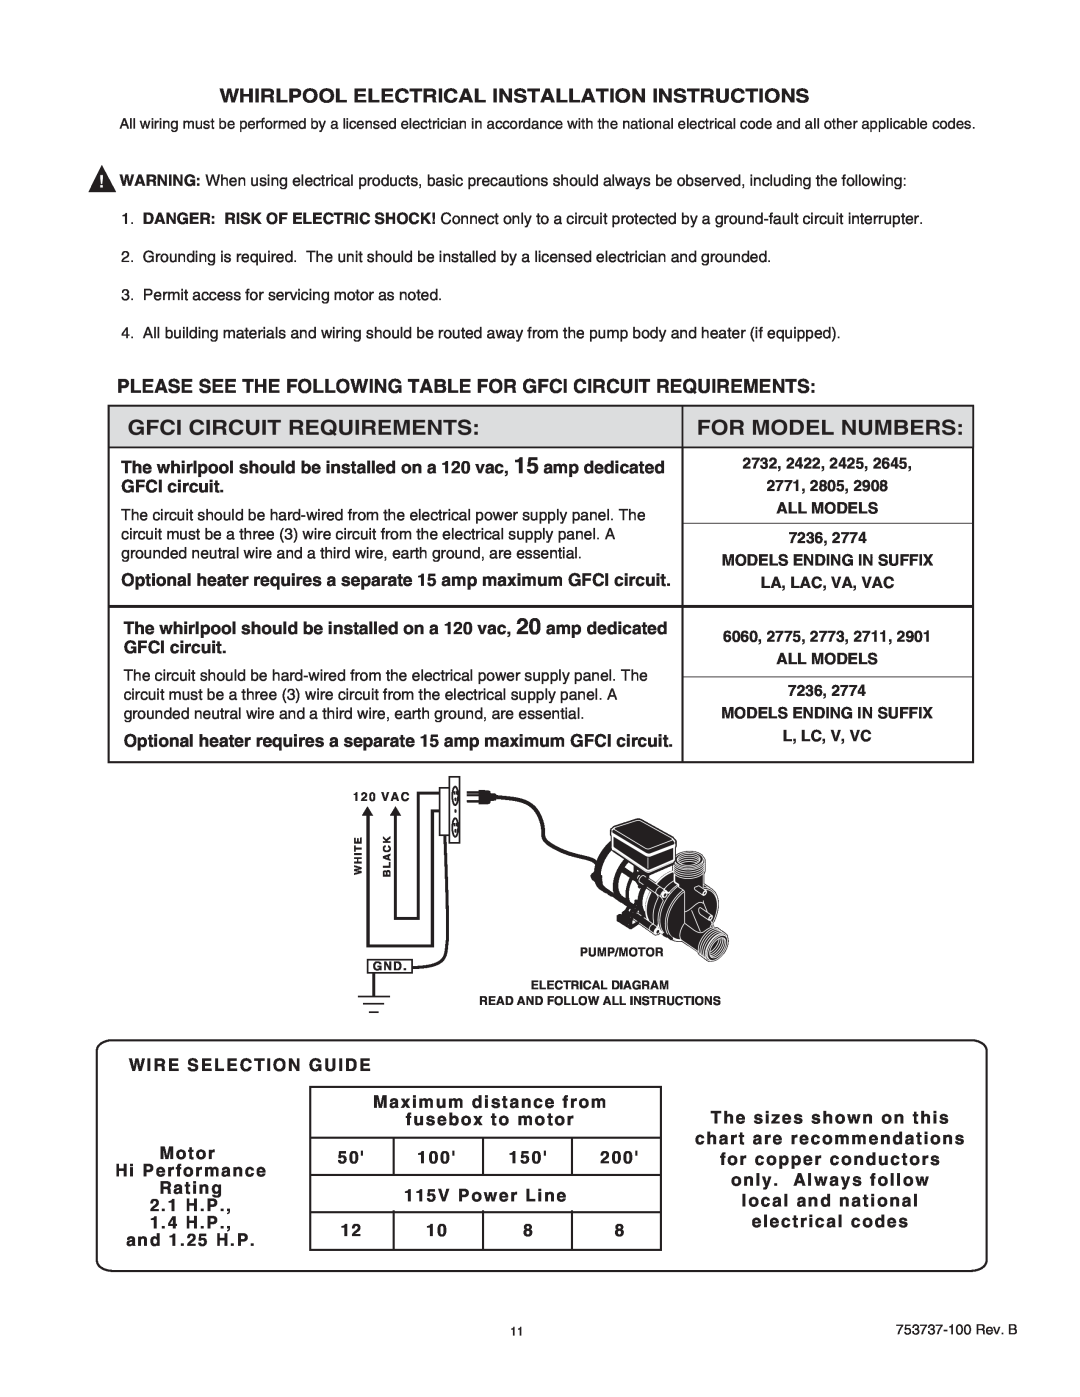 American Standard 2771VA Gfci Circuit Requirements, For Model Numbers, Whirlpool Electrical Installation Instructions 